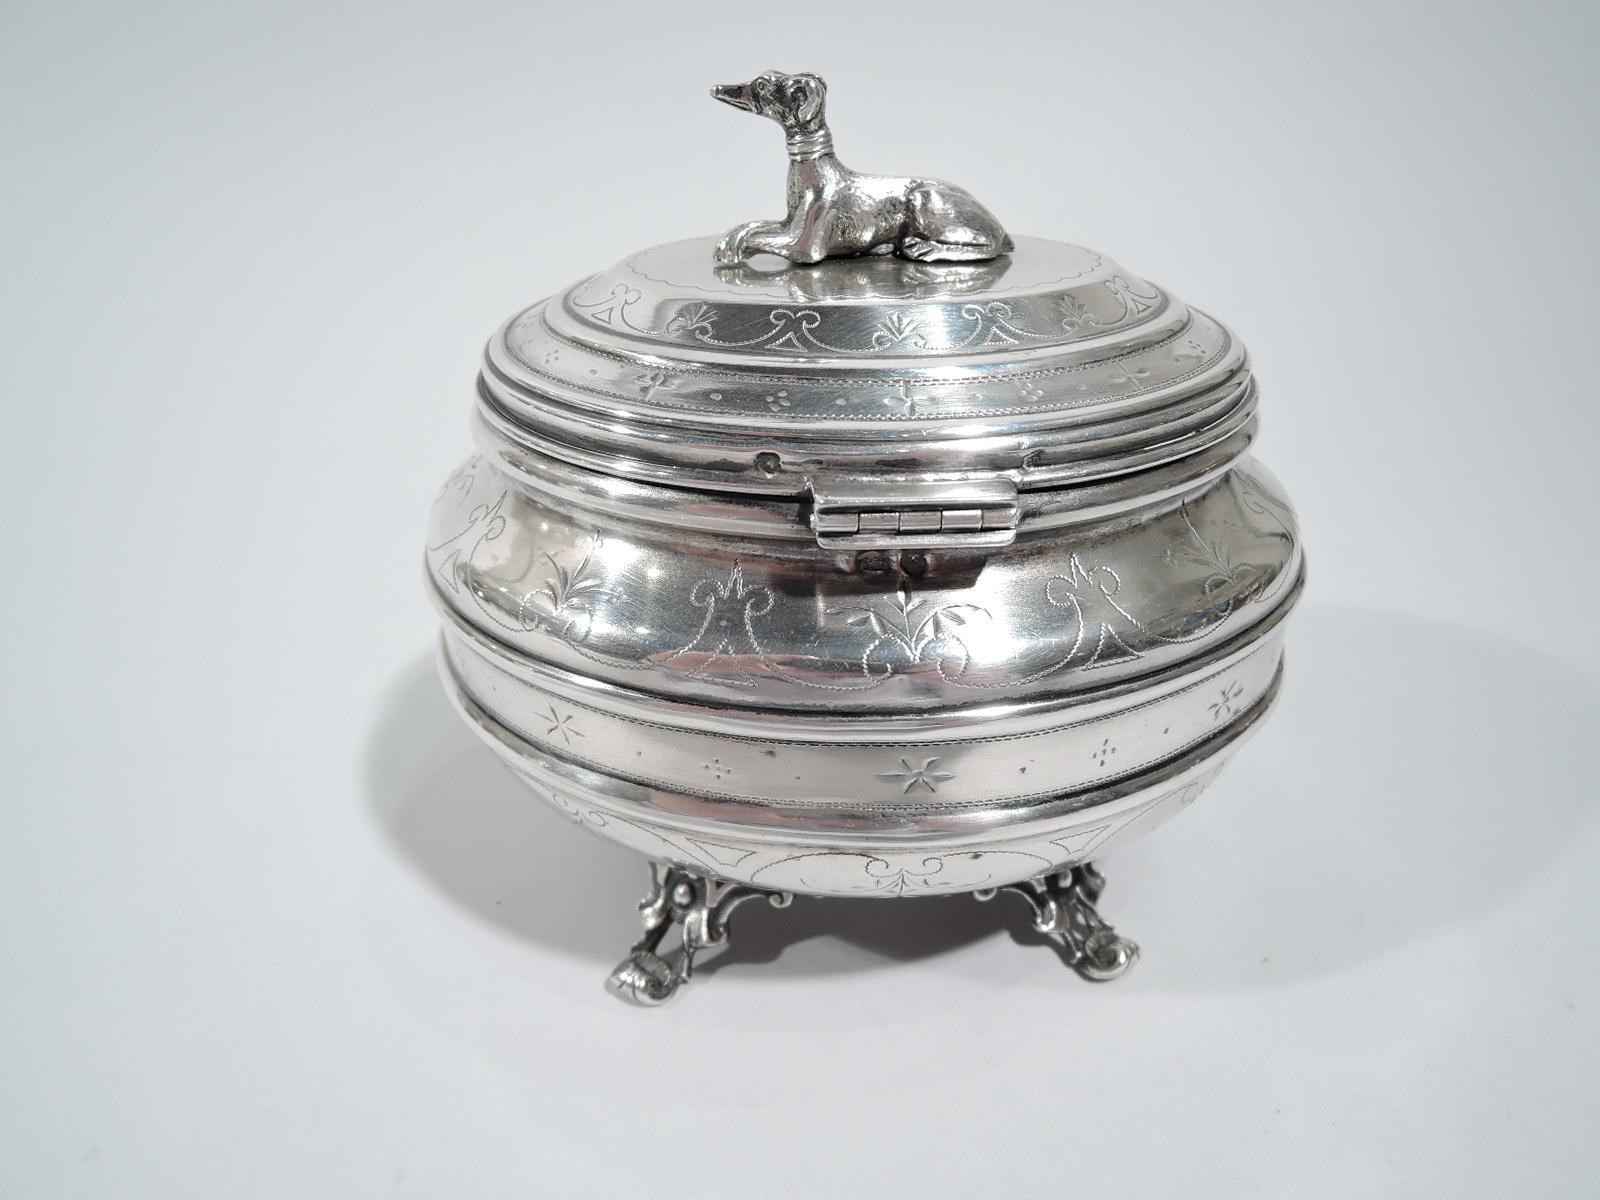 Austrian 800 silver box, circa 1910. Oval with double girdle and hinged and raised cover. Four fancy scroll and shell supports. Pointille scrolled bands and engraved stylized flowers. Cover top has cast canine finial in form of recumbent greyhound.